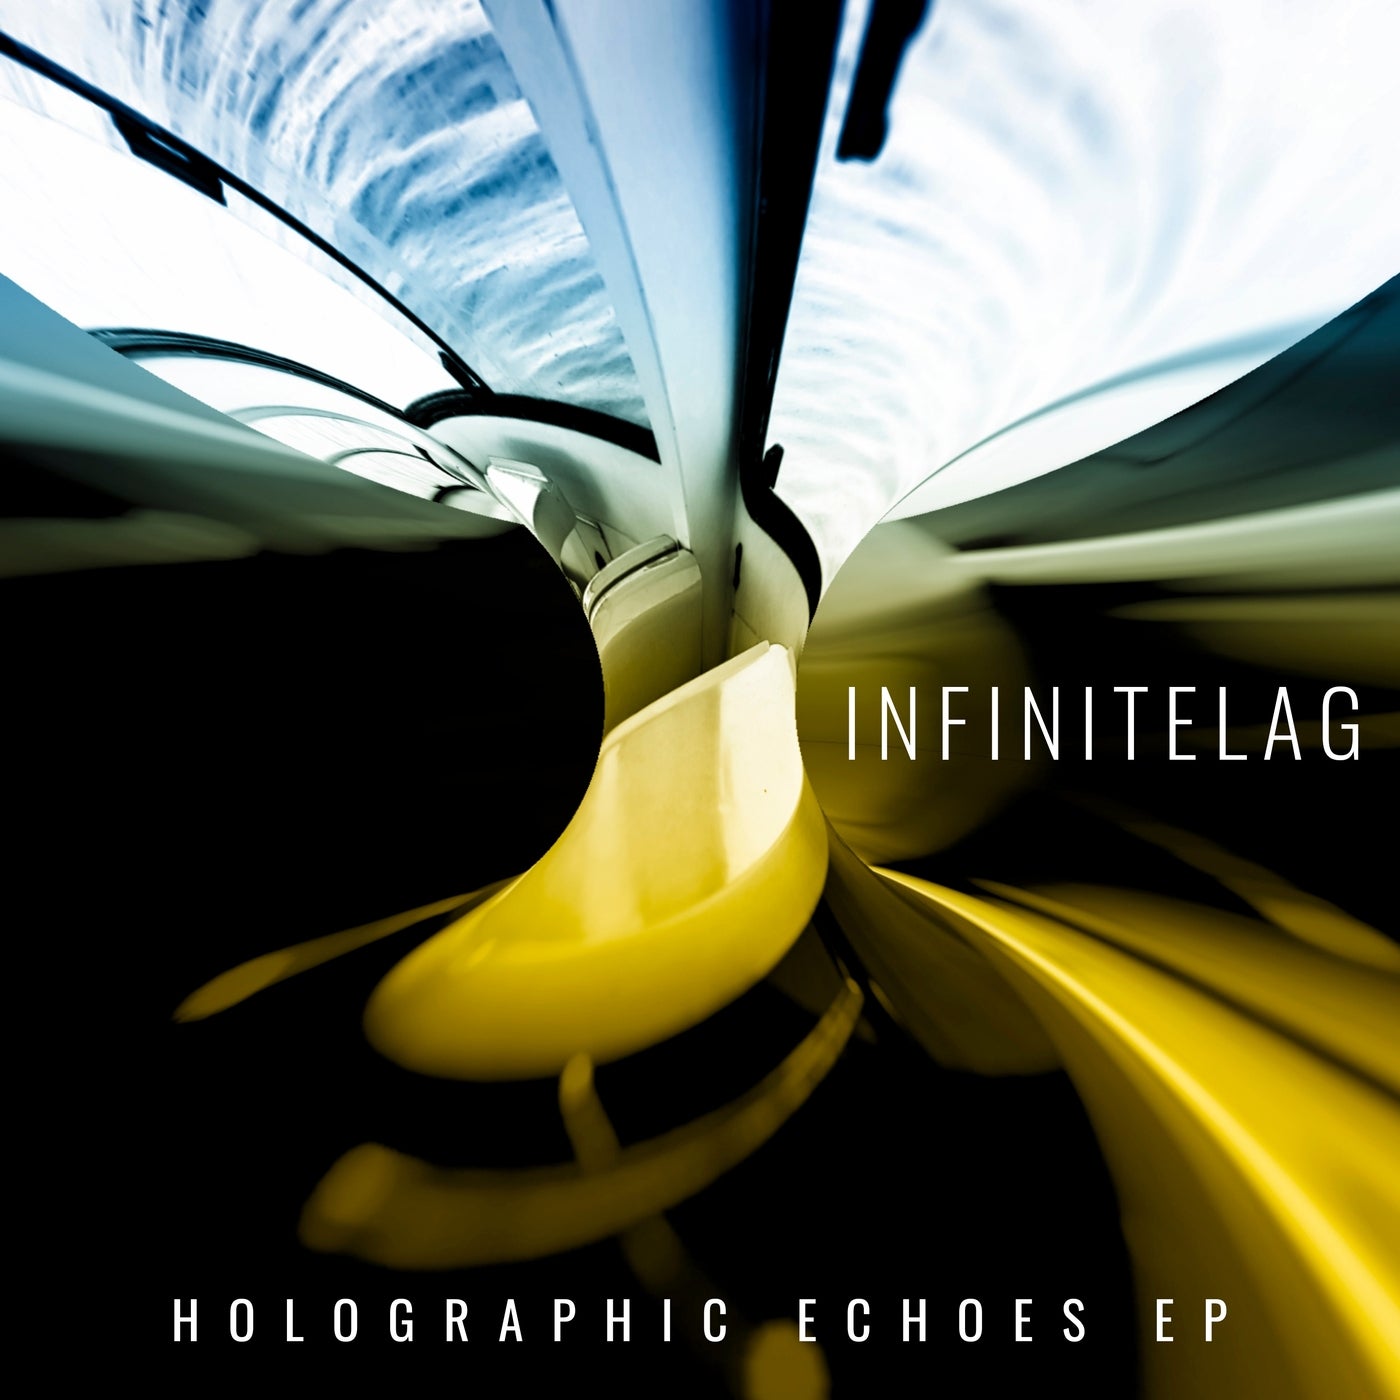 Holographic Echoes EP